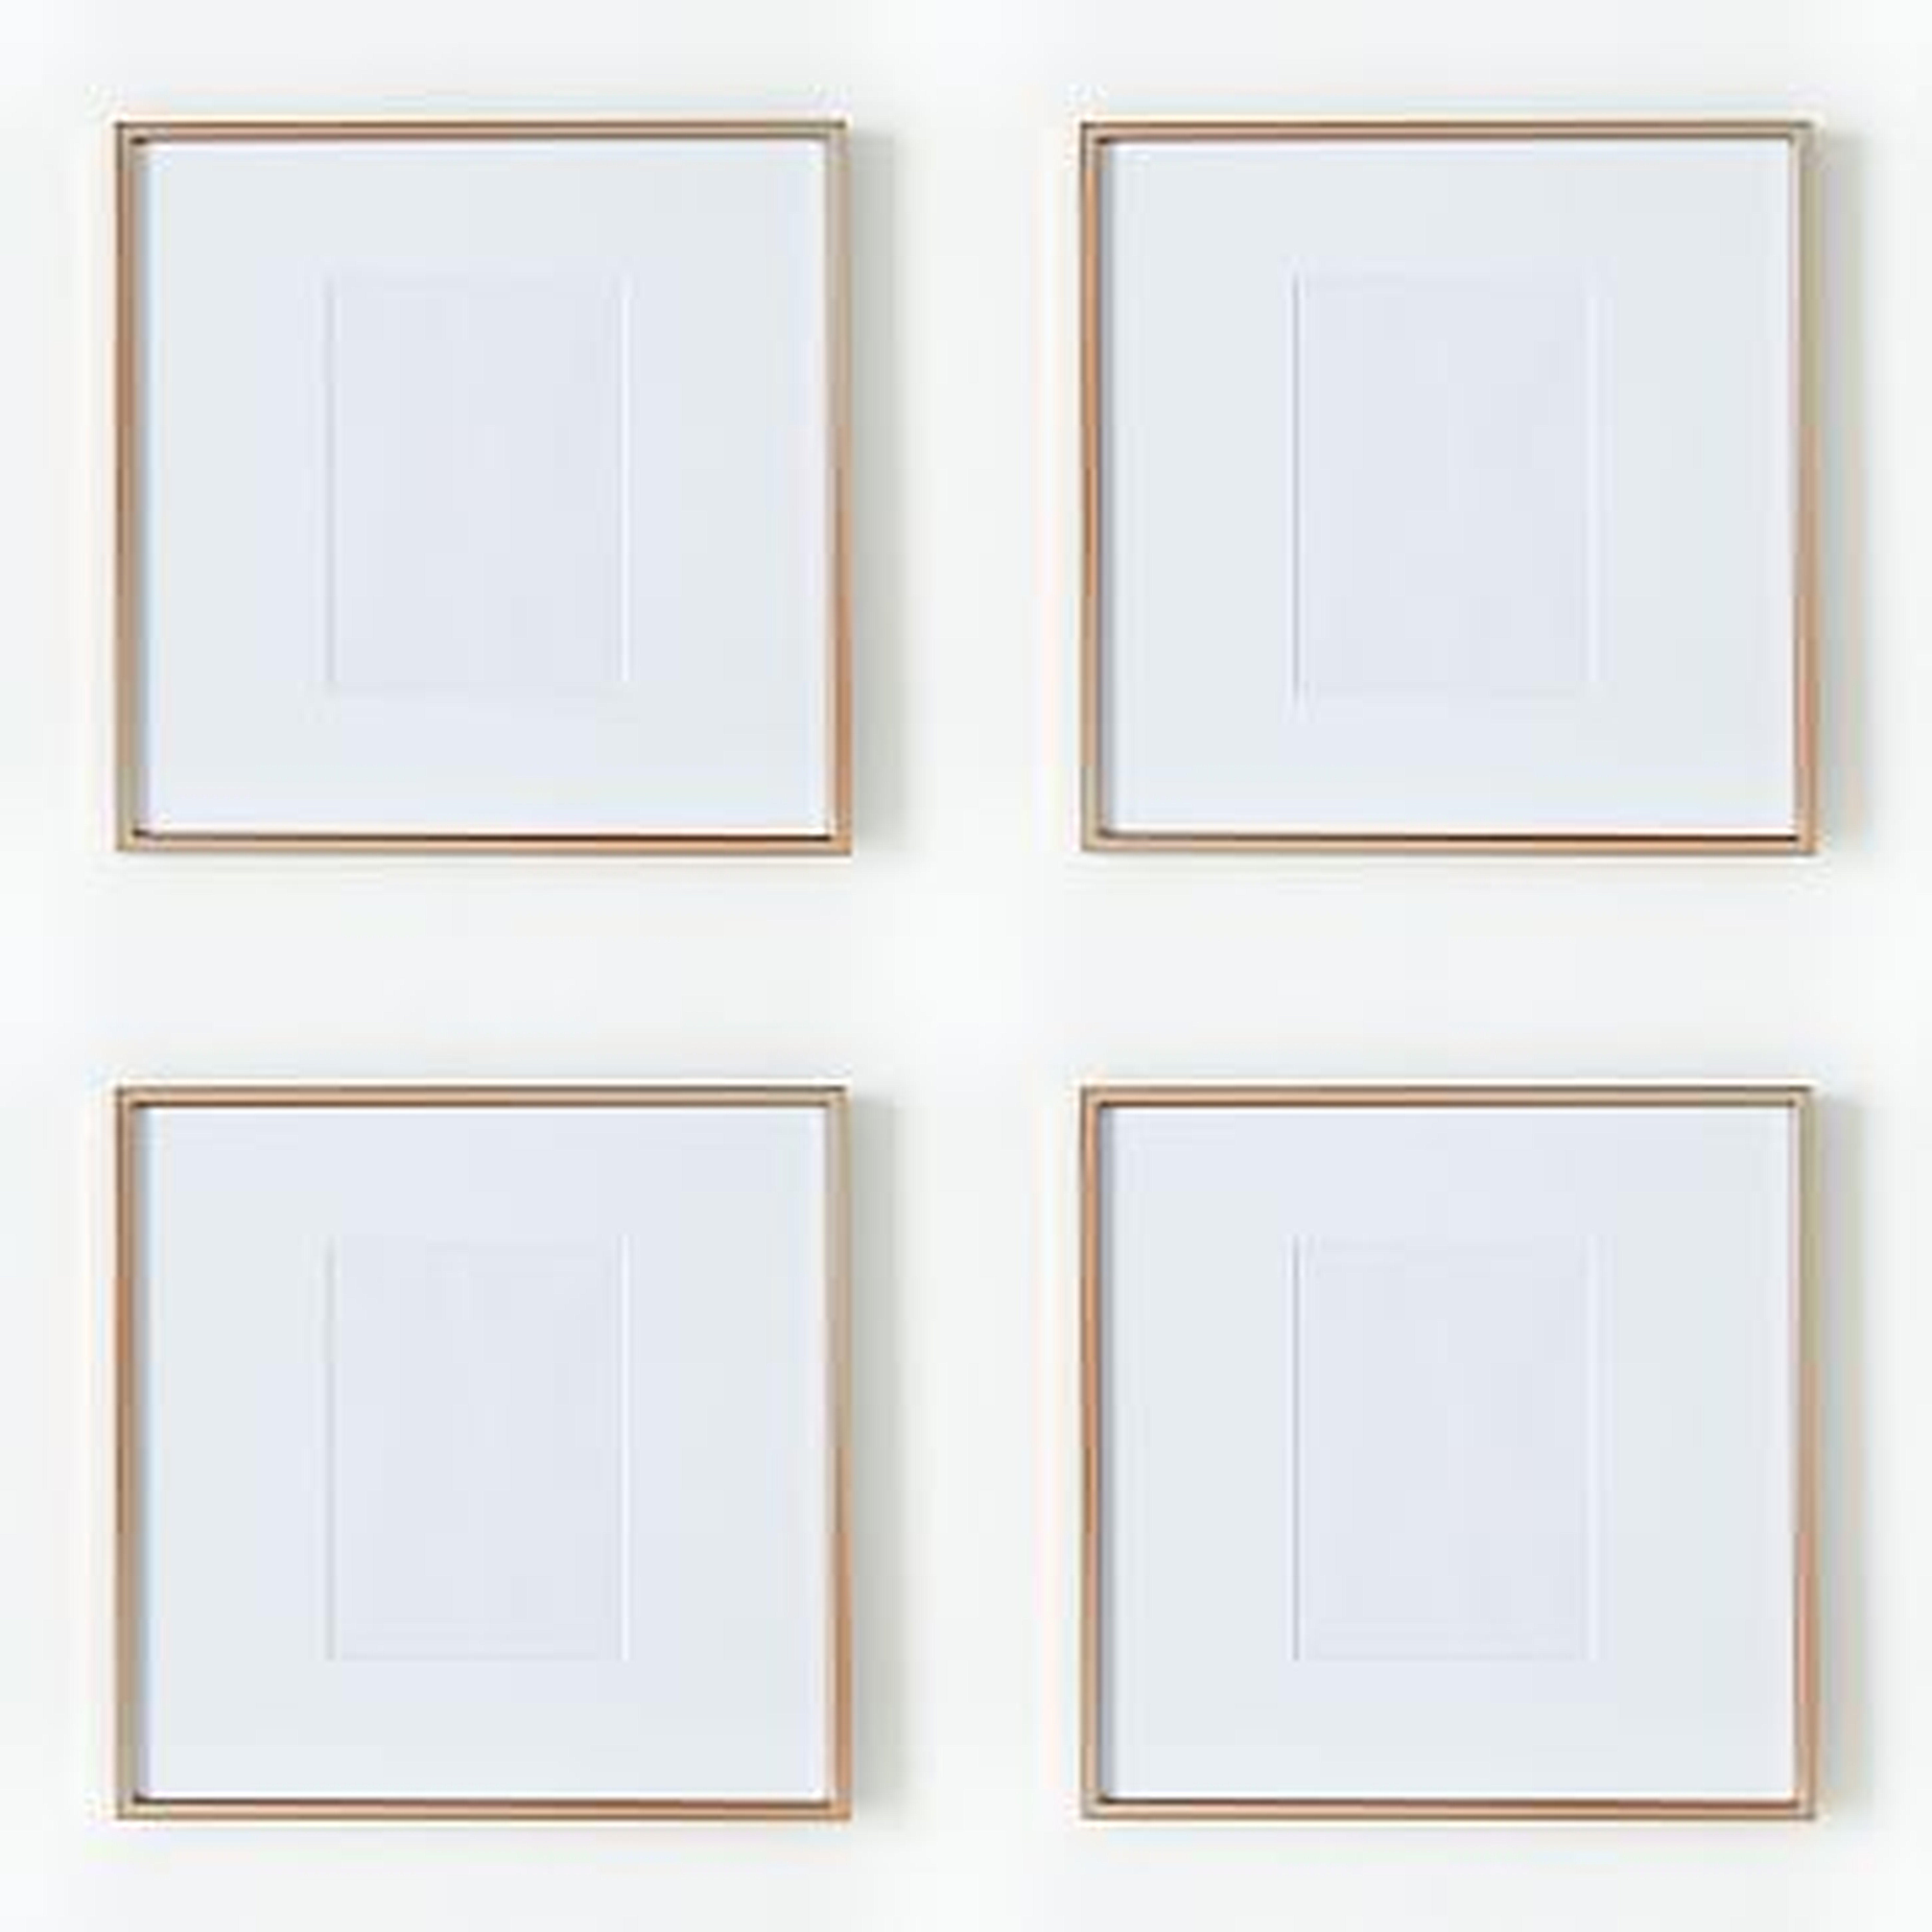 Gallery Frame, Rose Gold, Set of 4, 5" x 7" (12" x 12" without mat) - West Elm